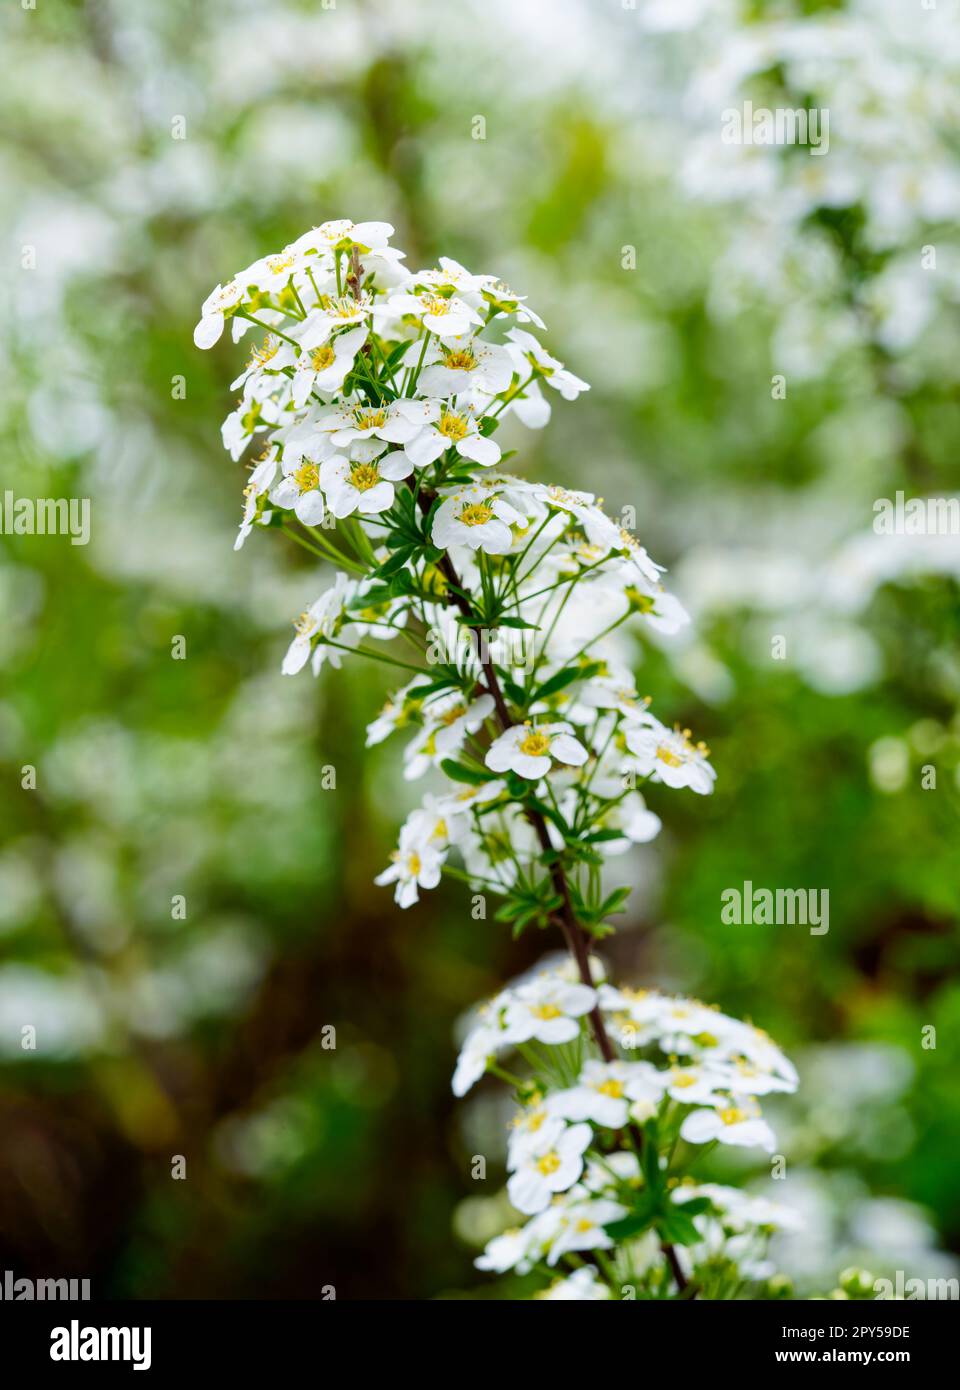 A close up of the mass of white flowers on a Spirea shrub Stock Photo